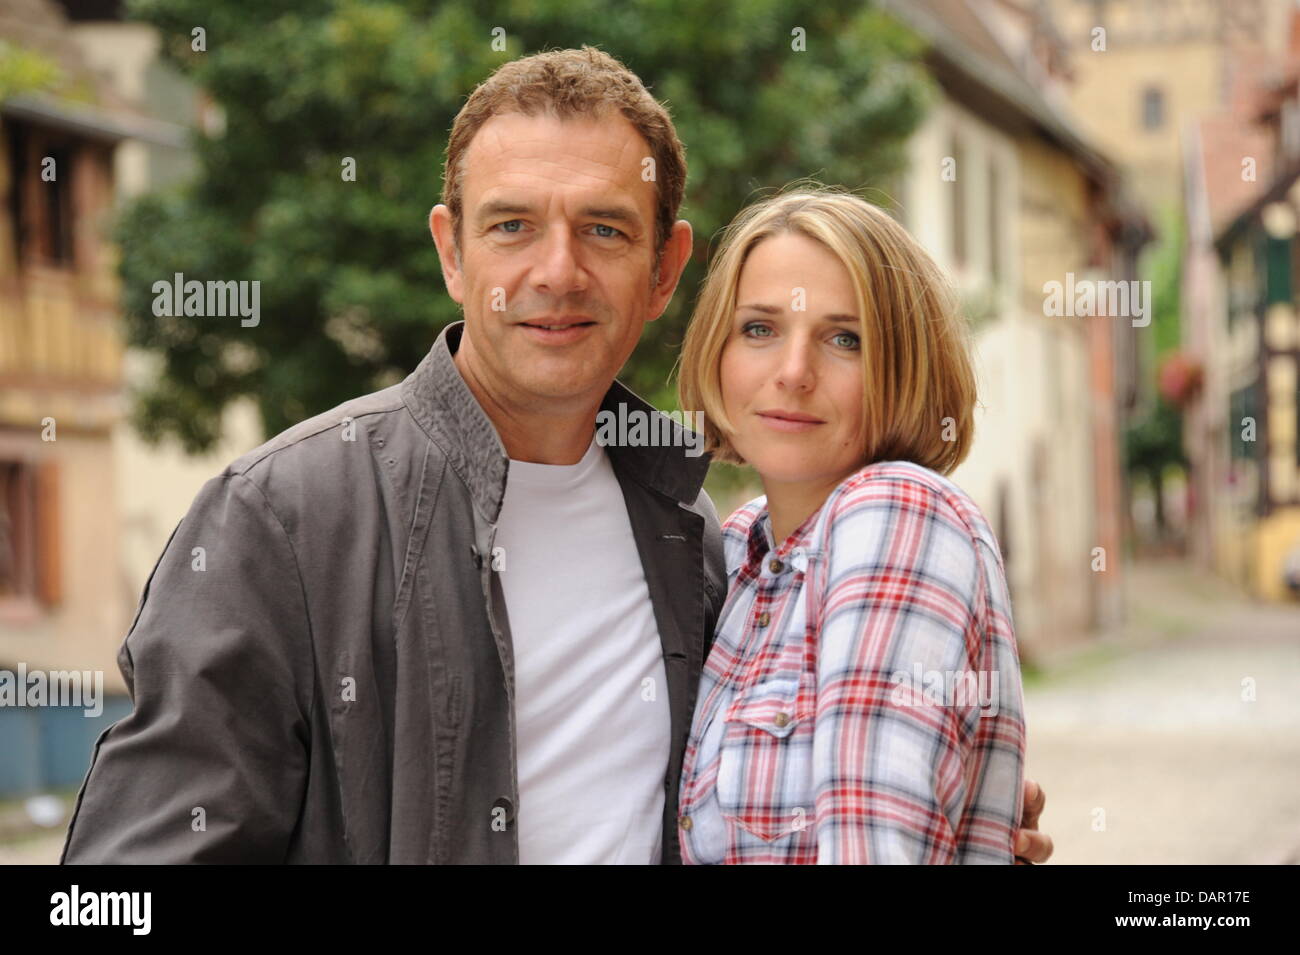 Actor Jean-Yves Berteloot as Marc von der Lohe and actress Tanja Wedhorn as business woman Jeanine Weiss poses during filming for the German television broadcaster ZDF's production of 'Ein Sommer im Elsass' ('A Summer in Alsace') in Bergheim, France, 08 September 2011. The six film in the ZDF Sunday film series takes place in Alsace. Jeanine Weiss, business woman from Berlin, arriv Stock Photo